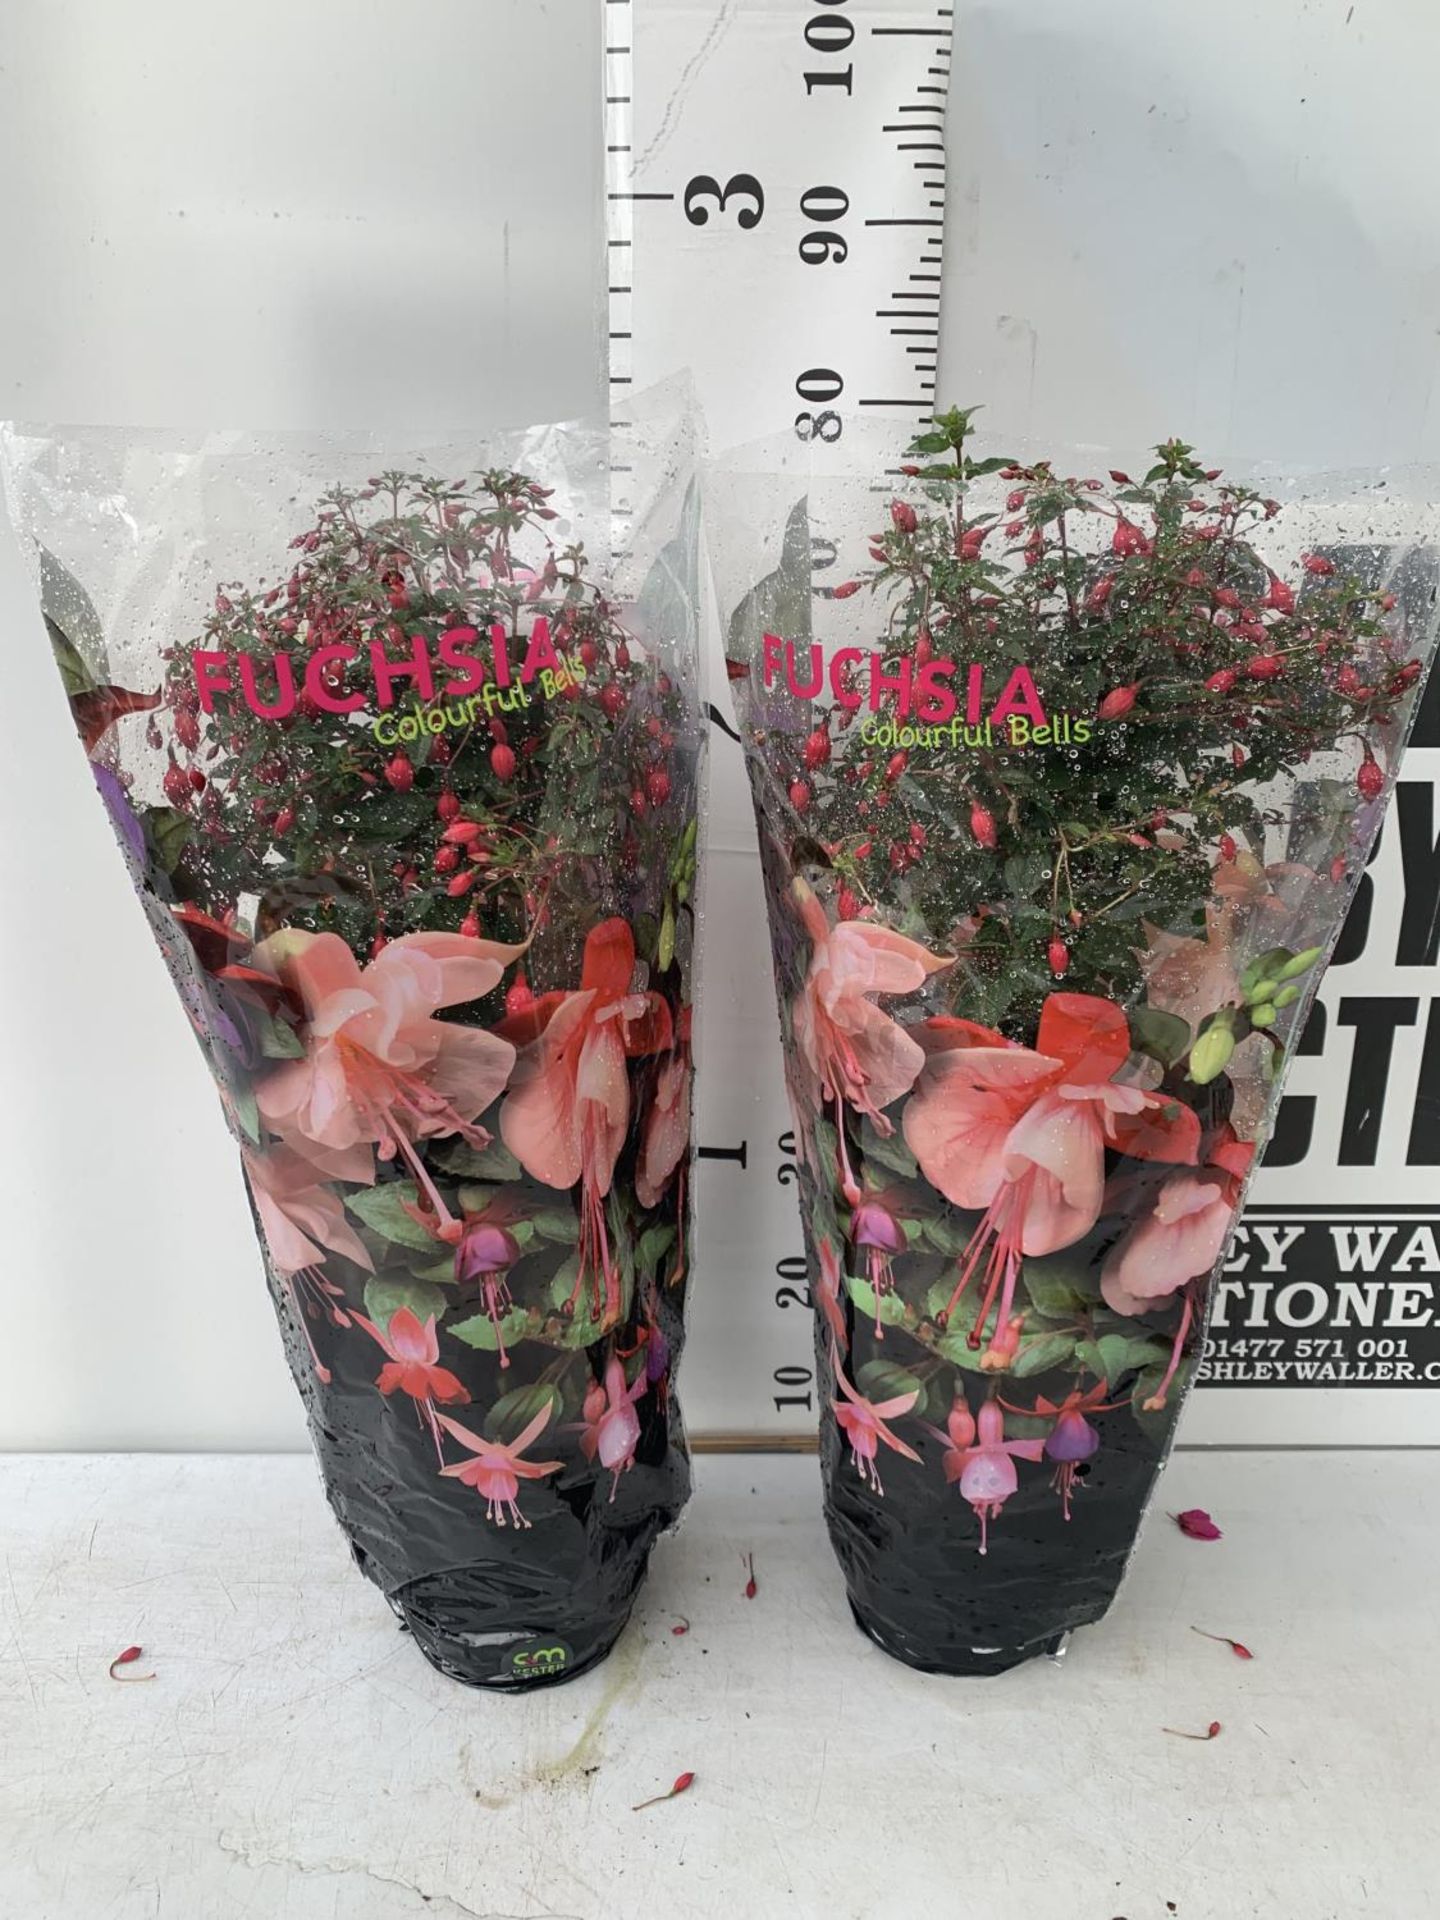 TWO BELLA STANDARD FUCHSIA IN A 3 LTR POTS 70CM -80CM TALL TO BE SOLD FOR THE TWO PLUS VAT - Image 5 of 5